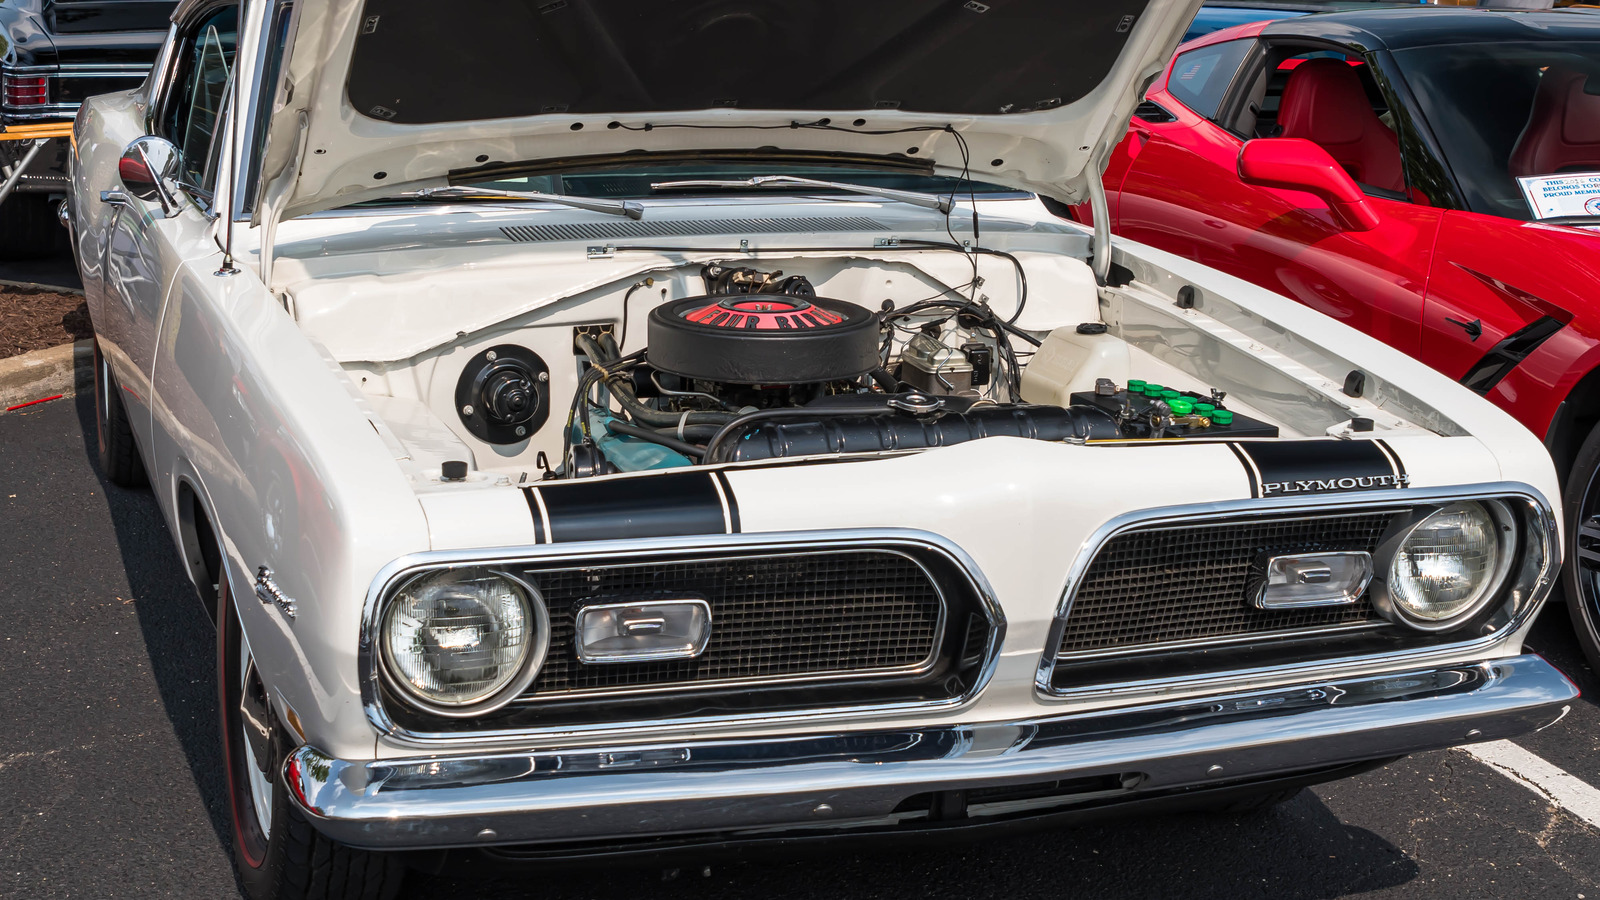 Mopar 340 Vs. 360: Which Is The Better Engine?